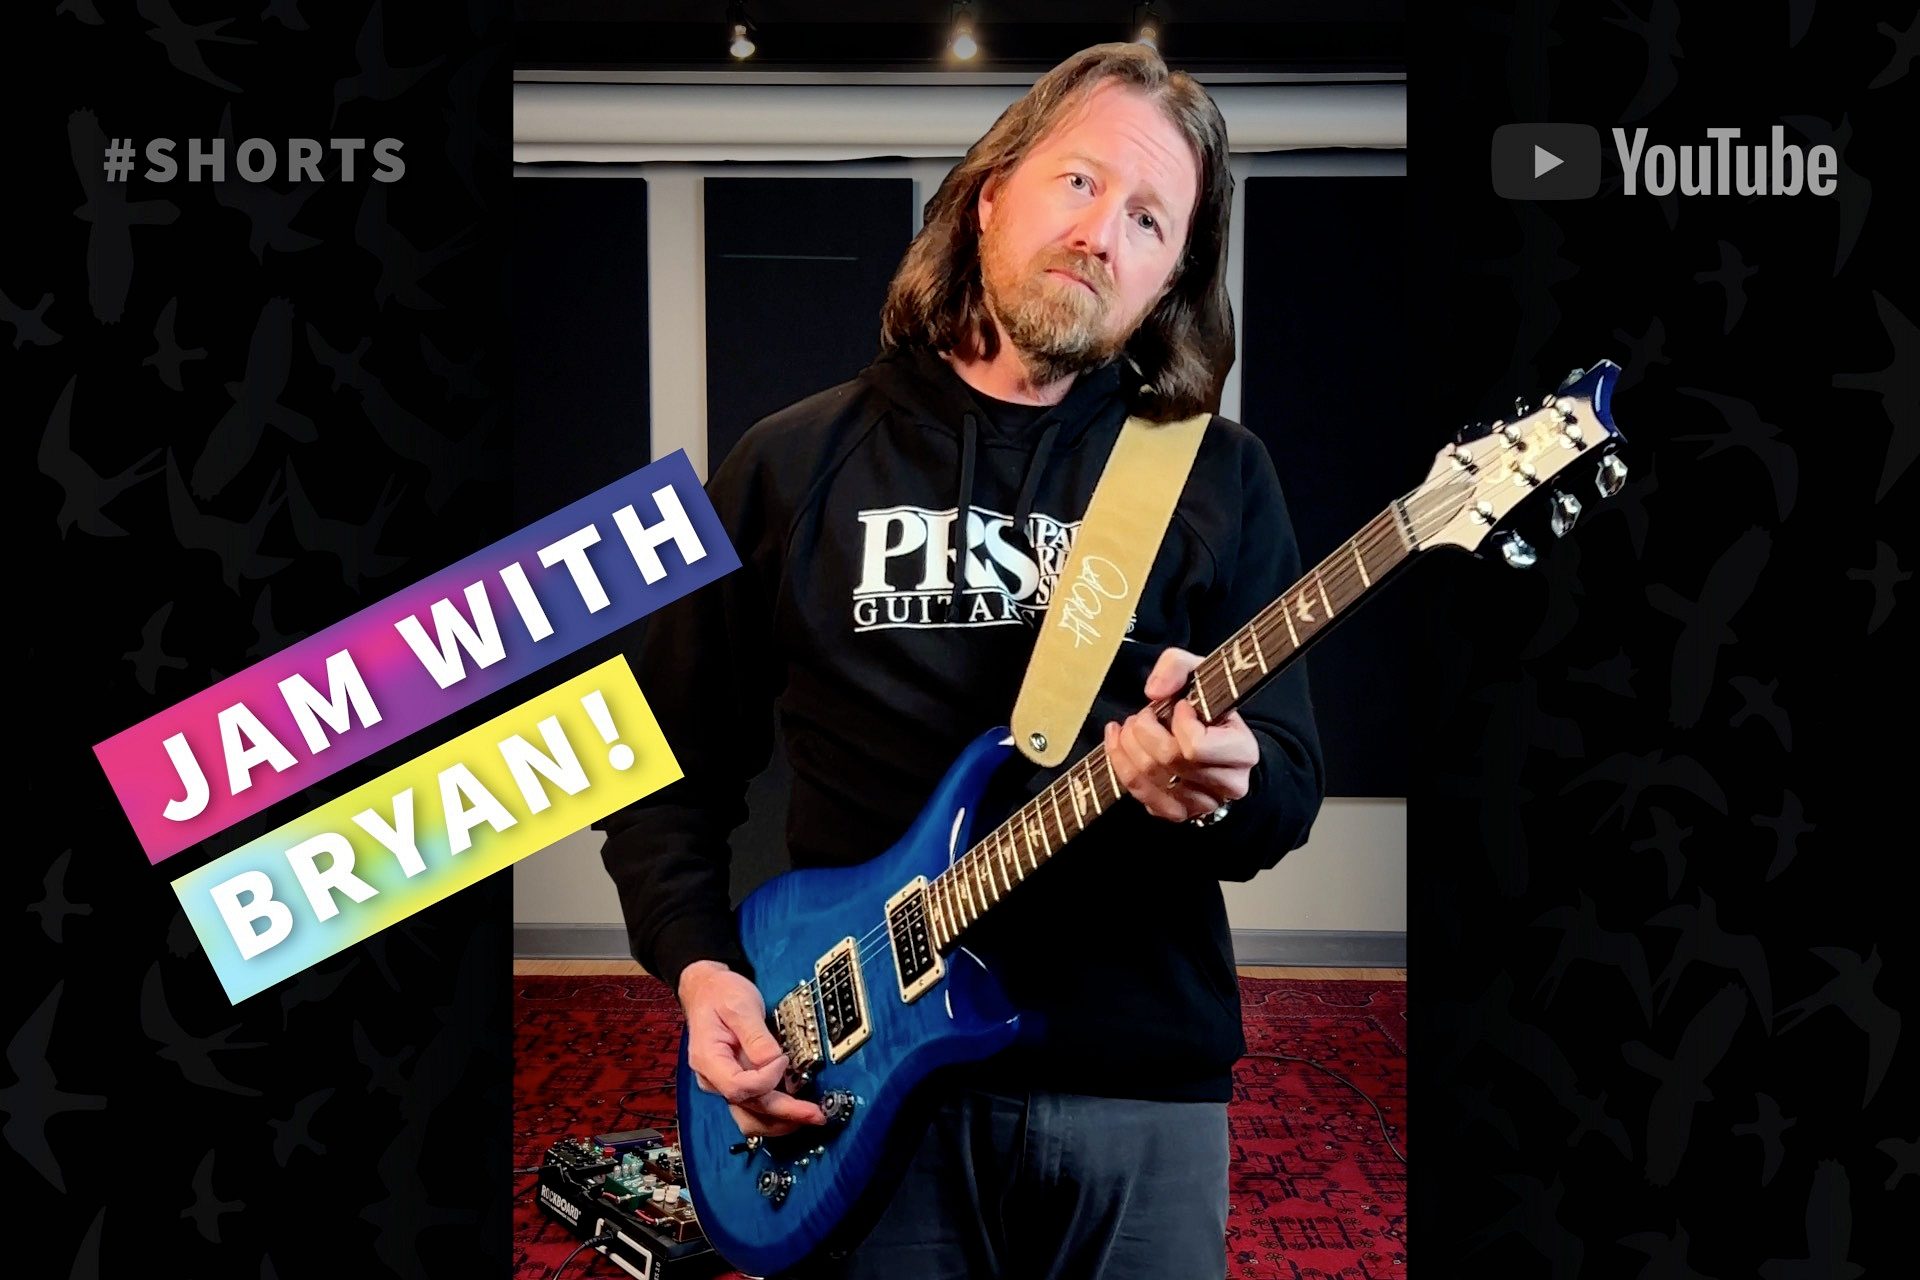 Grab your Guitar and Jam with Bryan - Part 2!